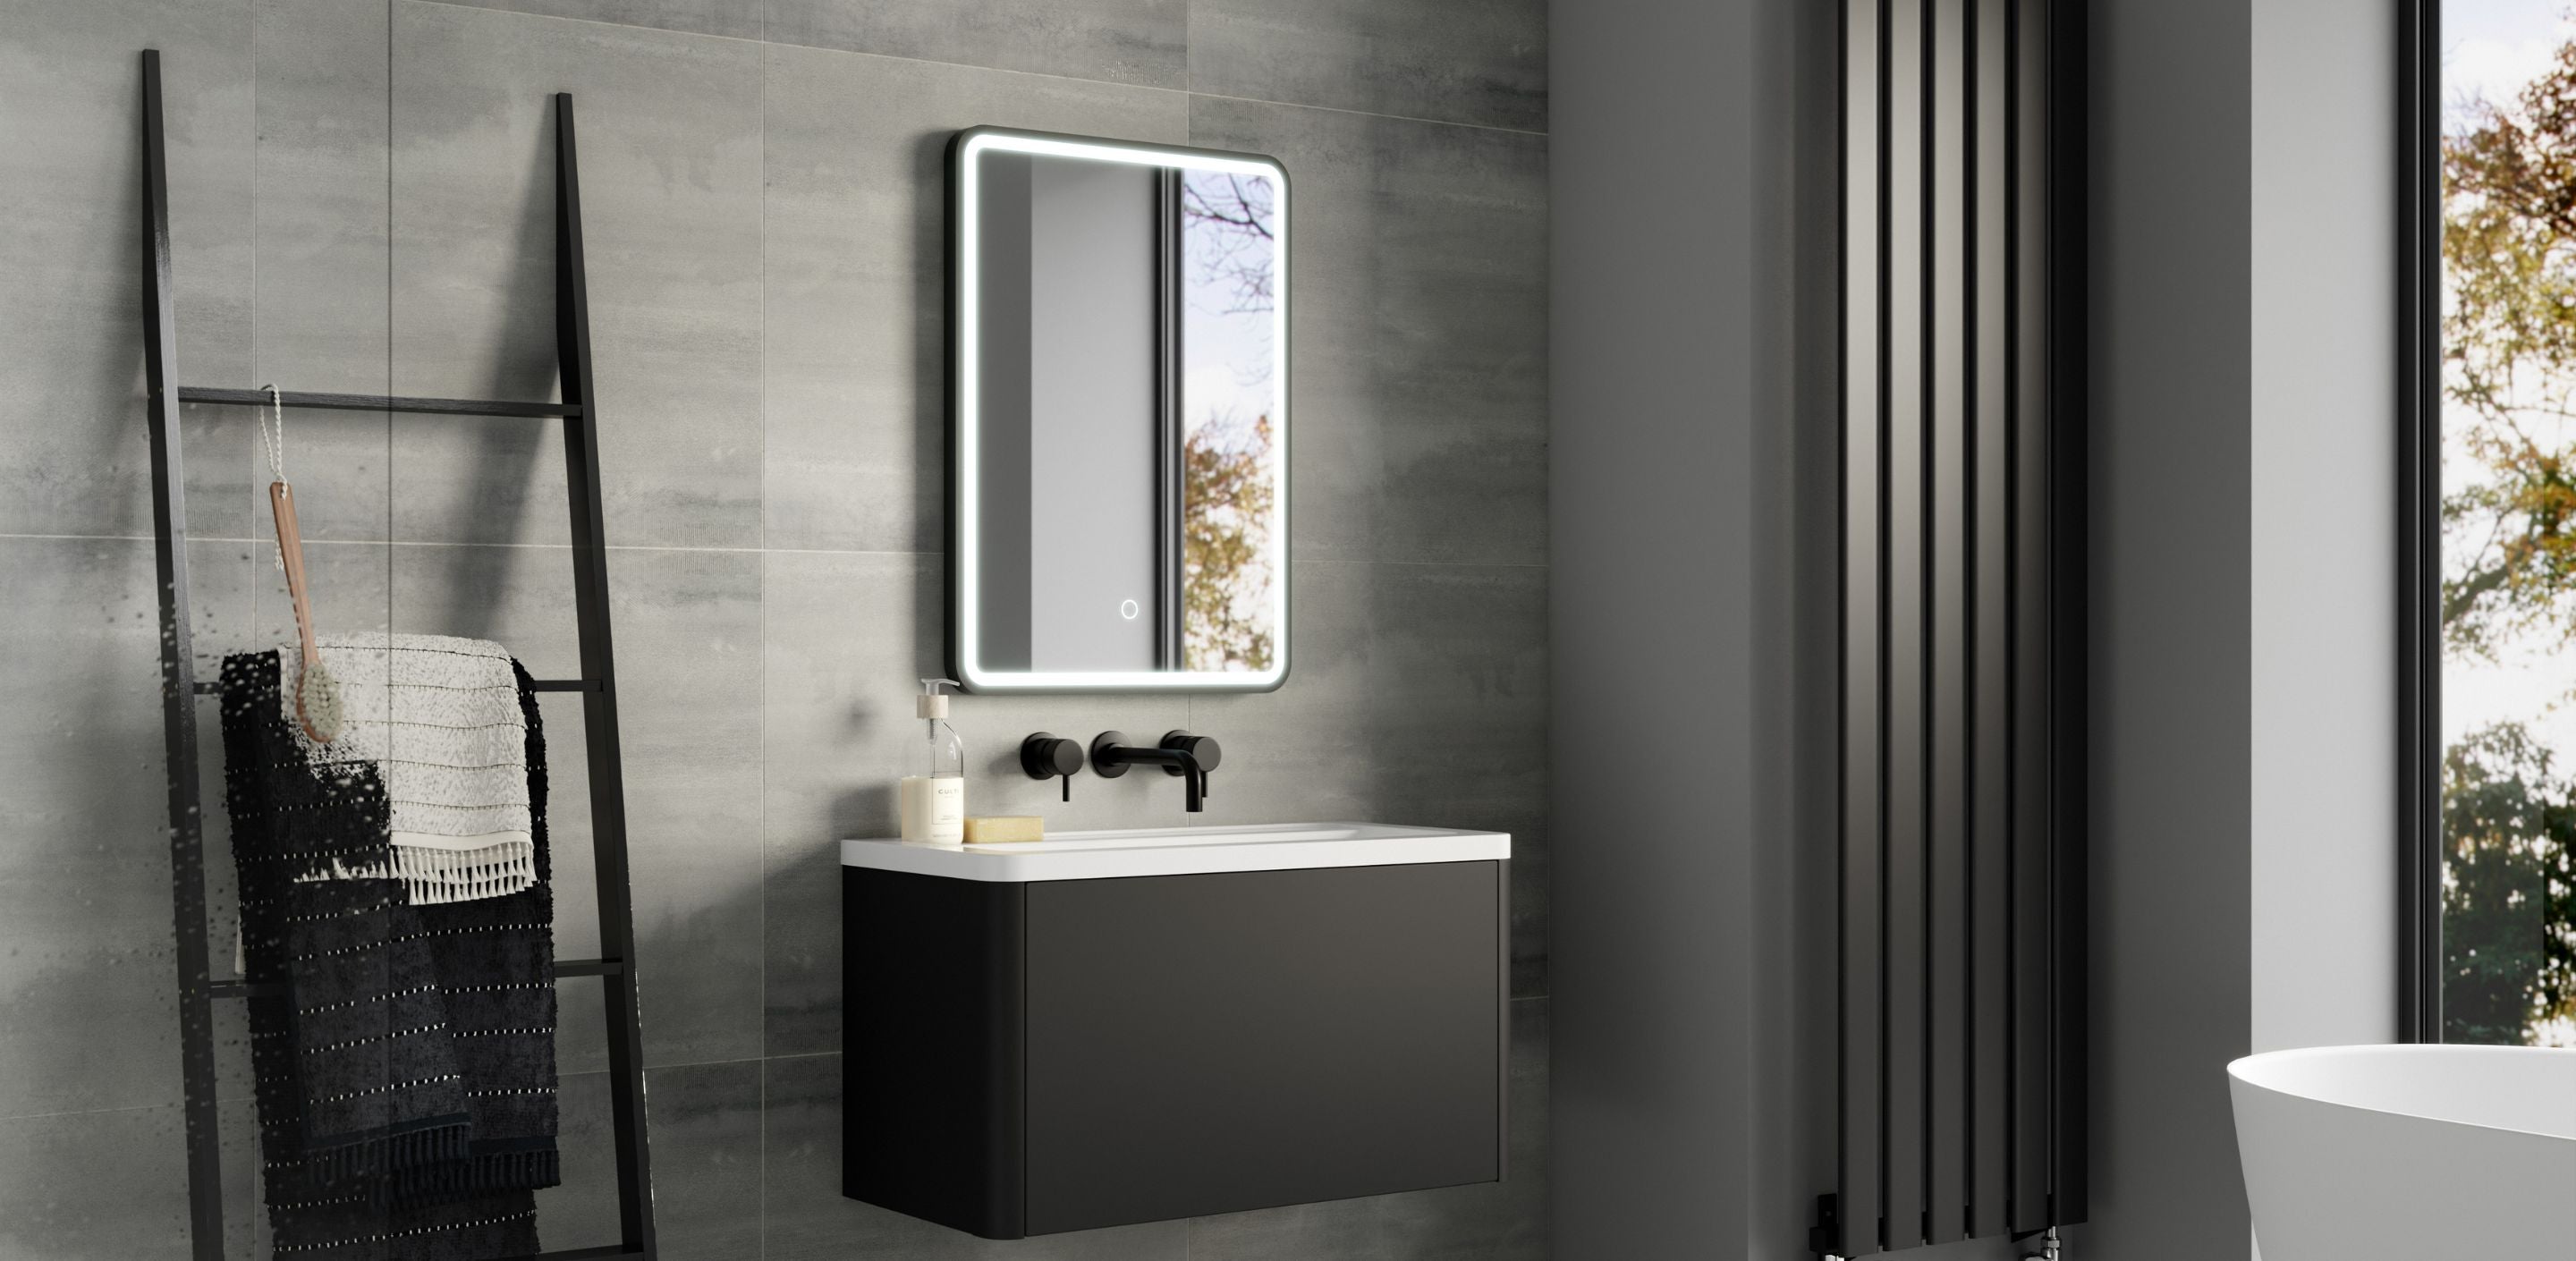 How to choose the best bathroom mirror